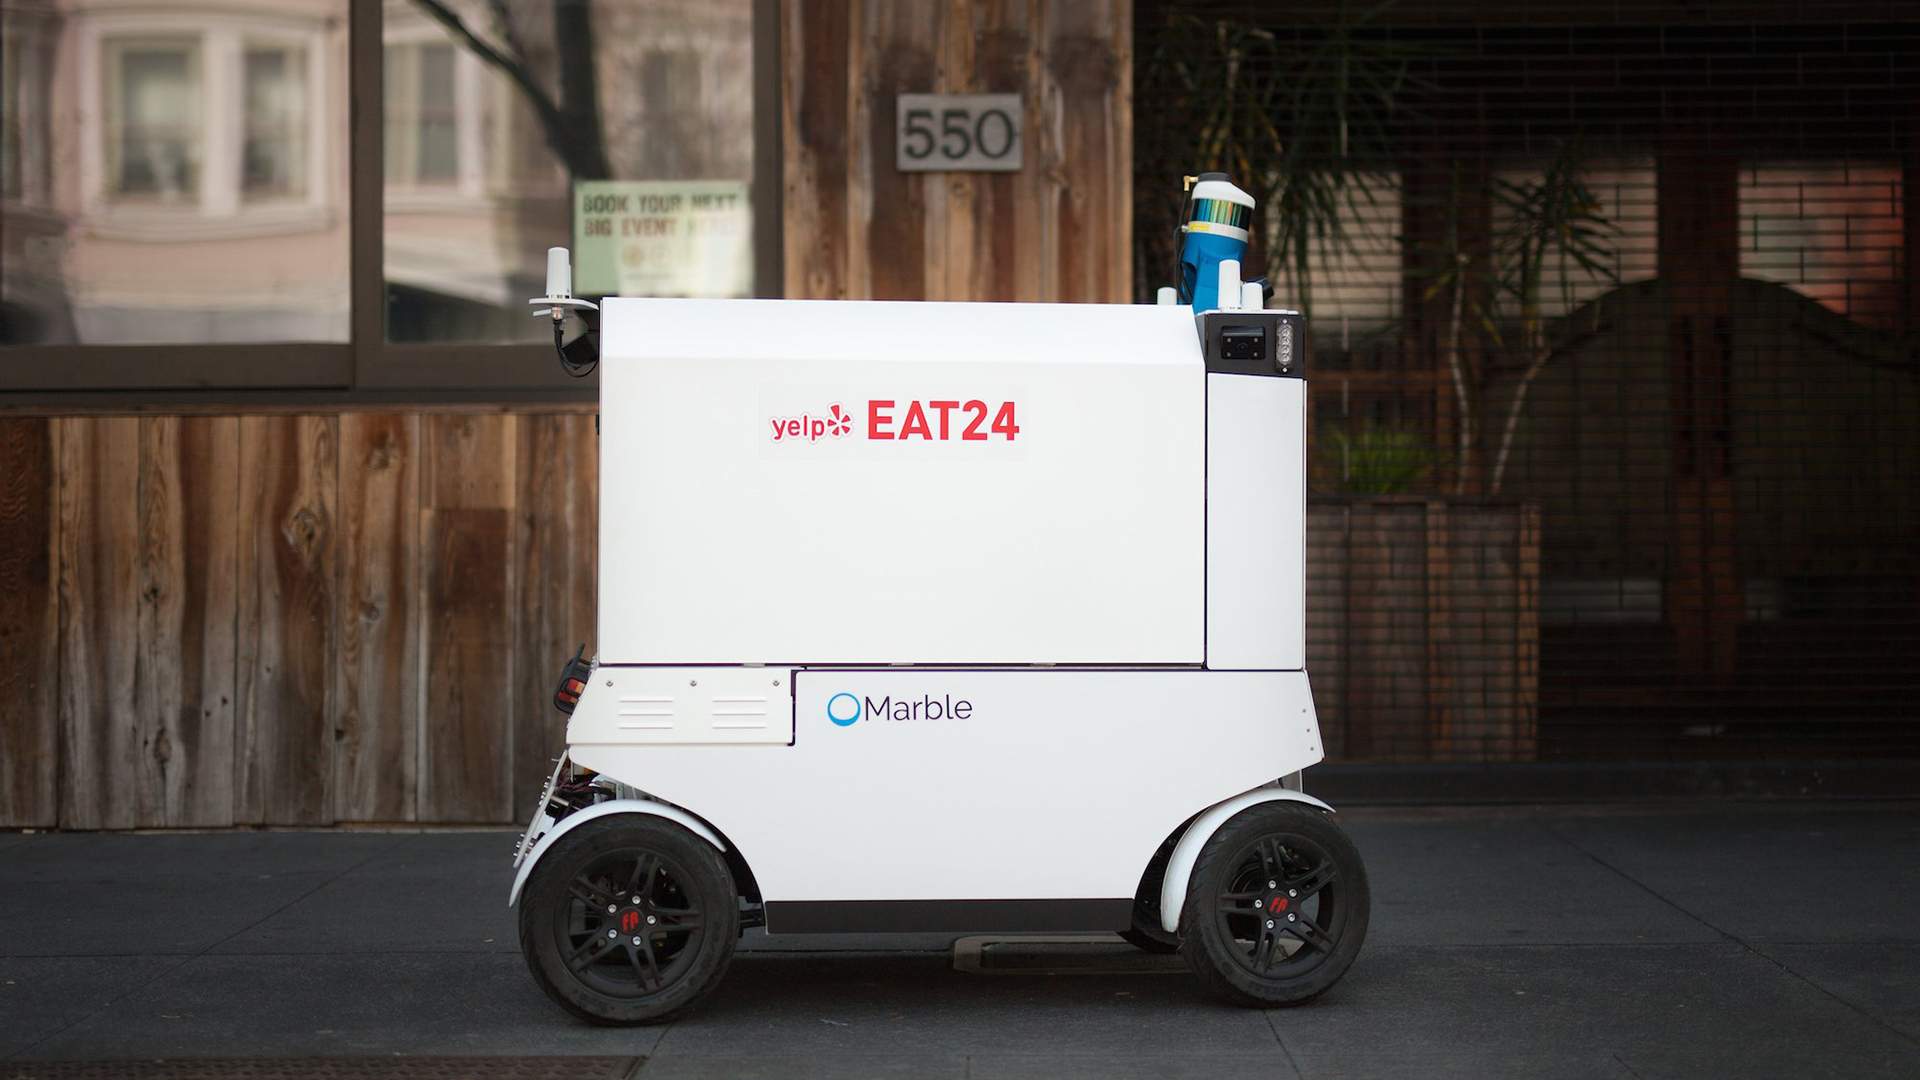 Four-Wheeled Food Delivery Robots Are Cruising the Streets of San Francisco